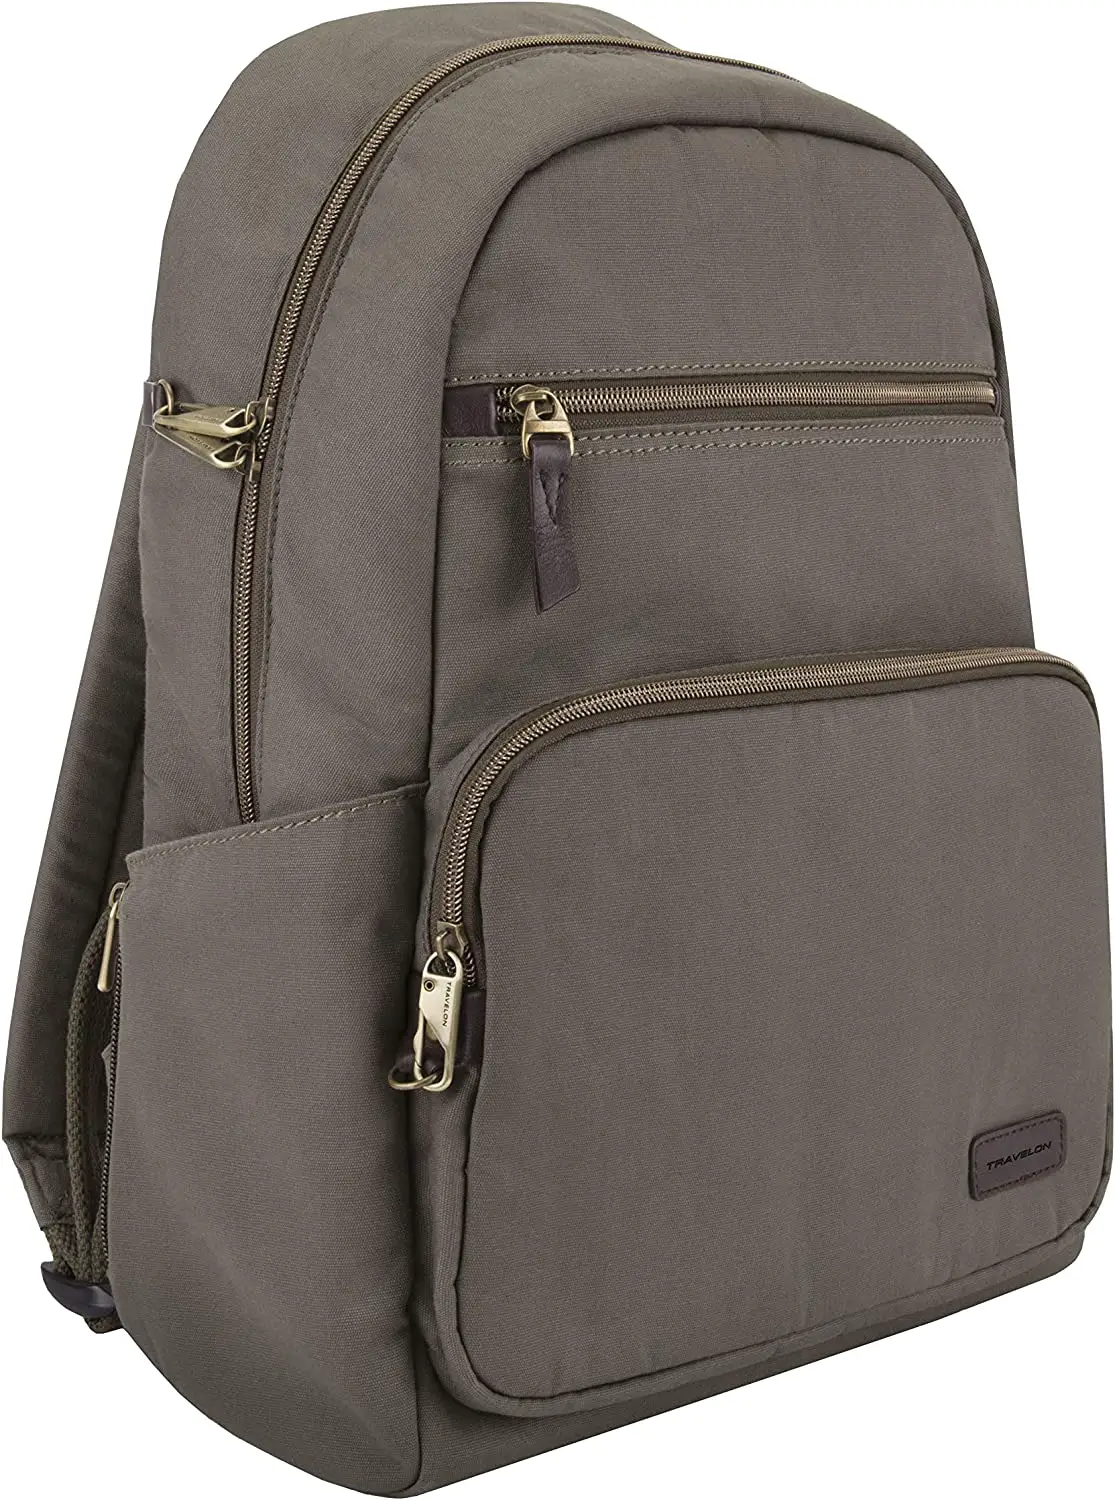 Travelon Anti-Theft Courier Slim Backpack 